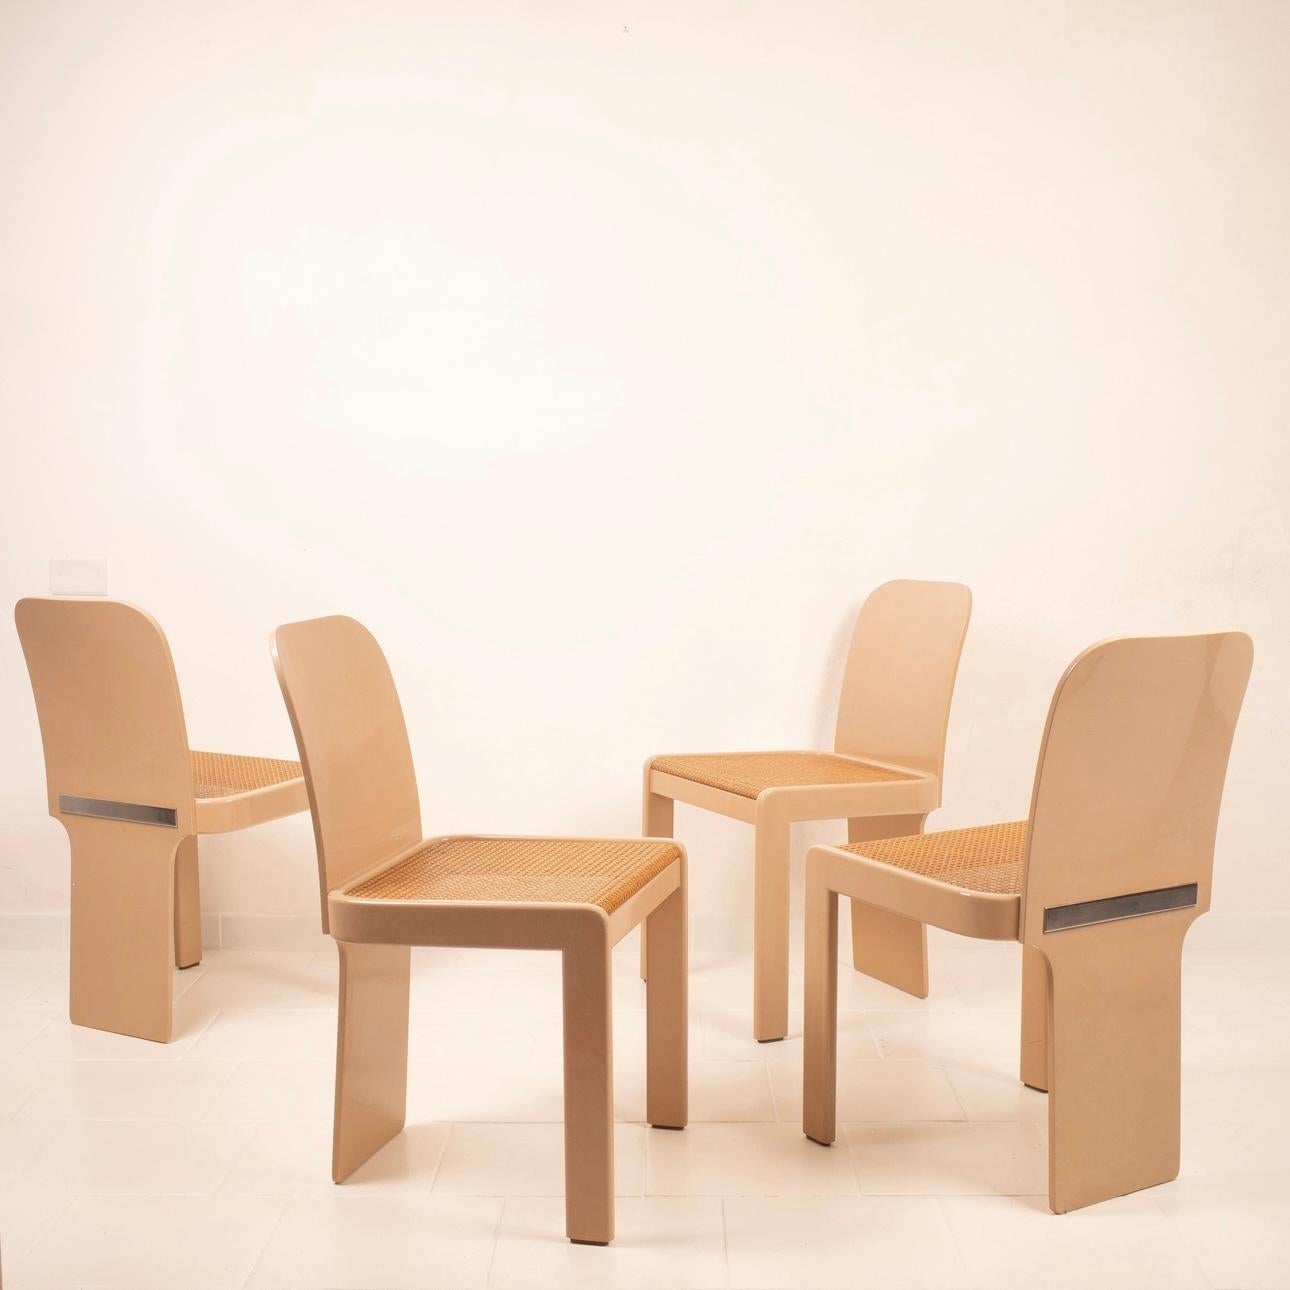 Set of 4 Chairs by Pierluigi Molinari for Pozzi For Sale 4